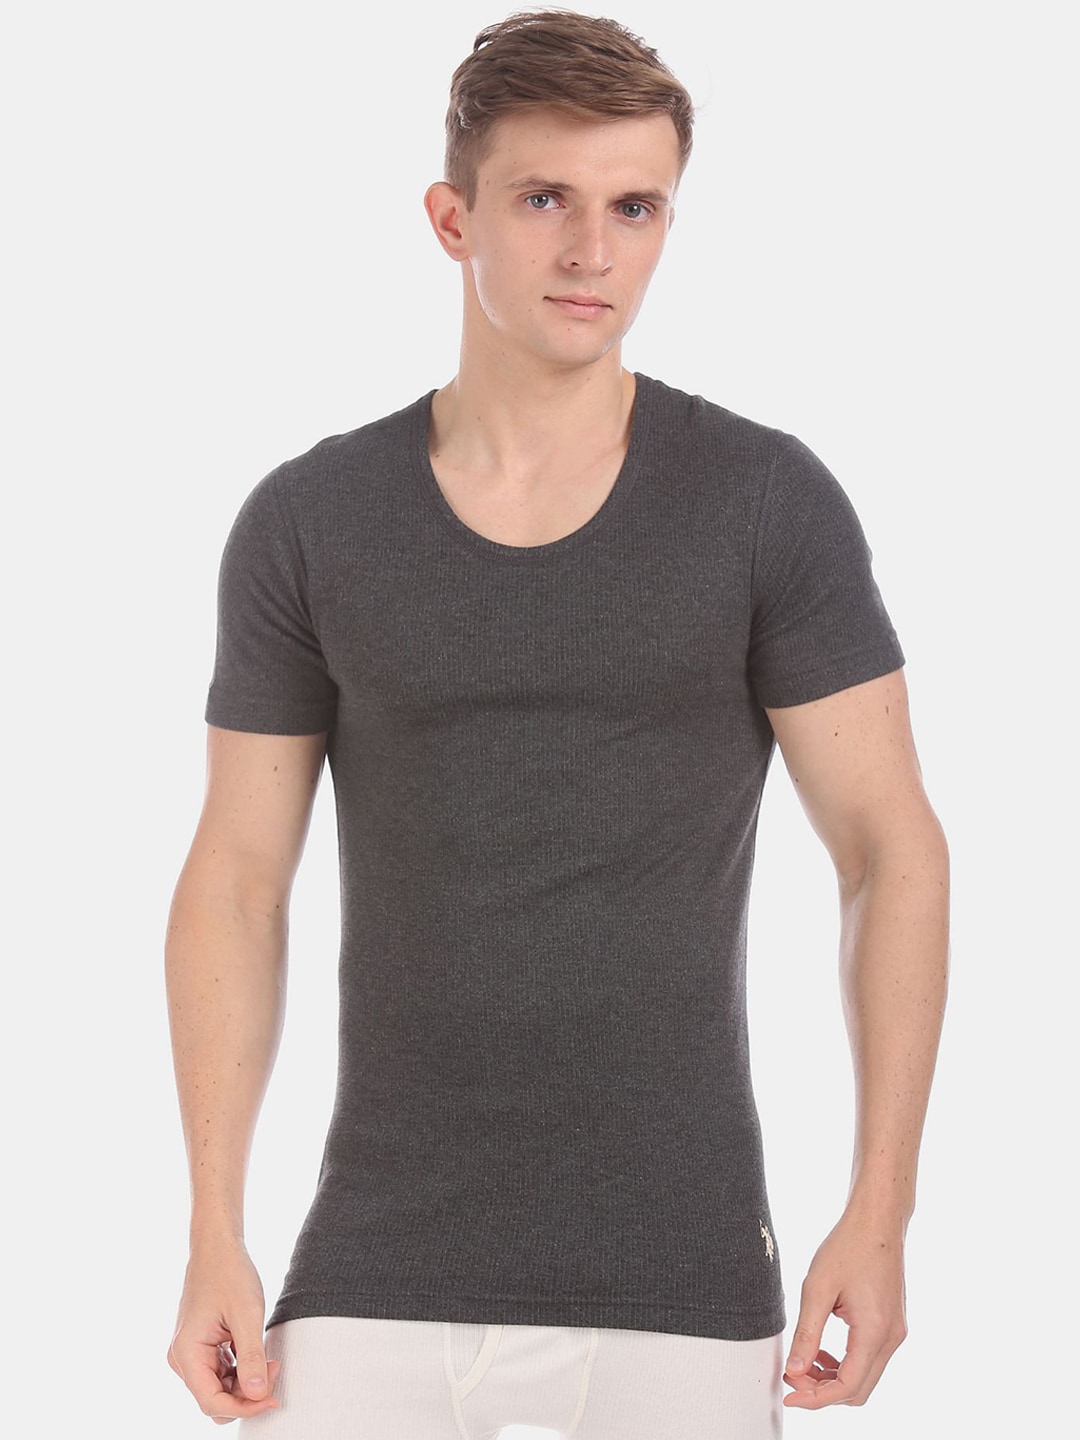 U.S. Polo Assn. Men's Grey Solid Snug-Fit Thermal Tops Price in India